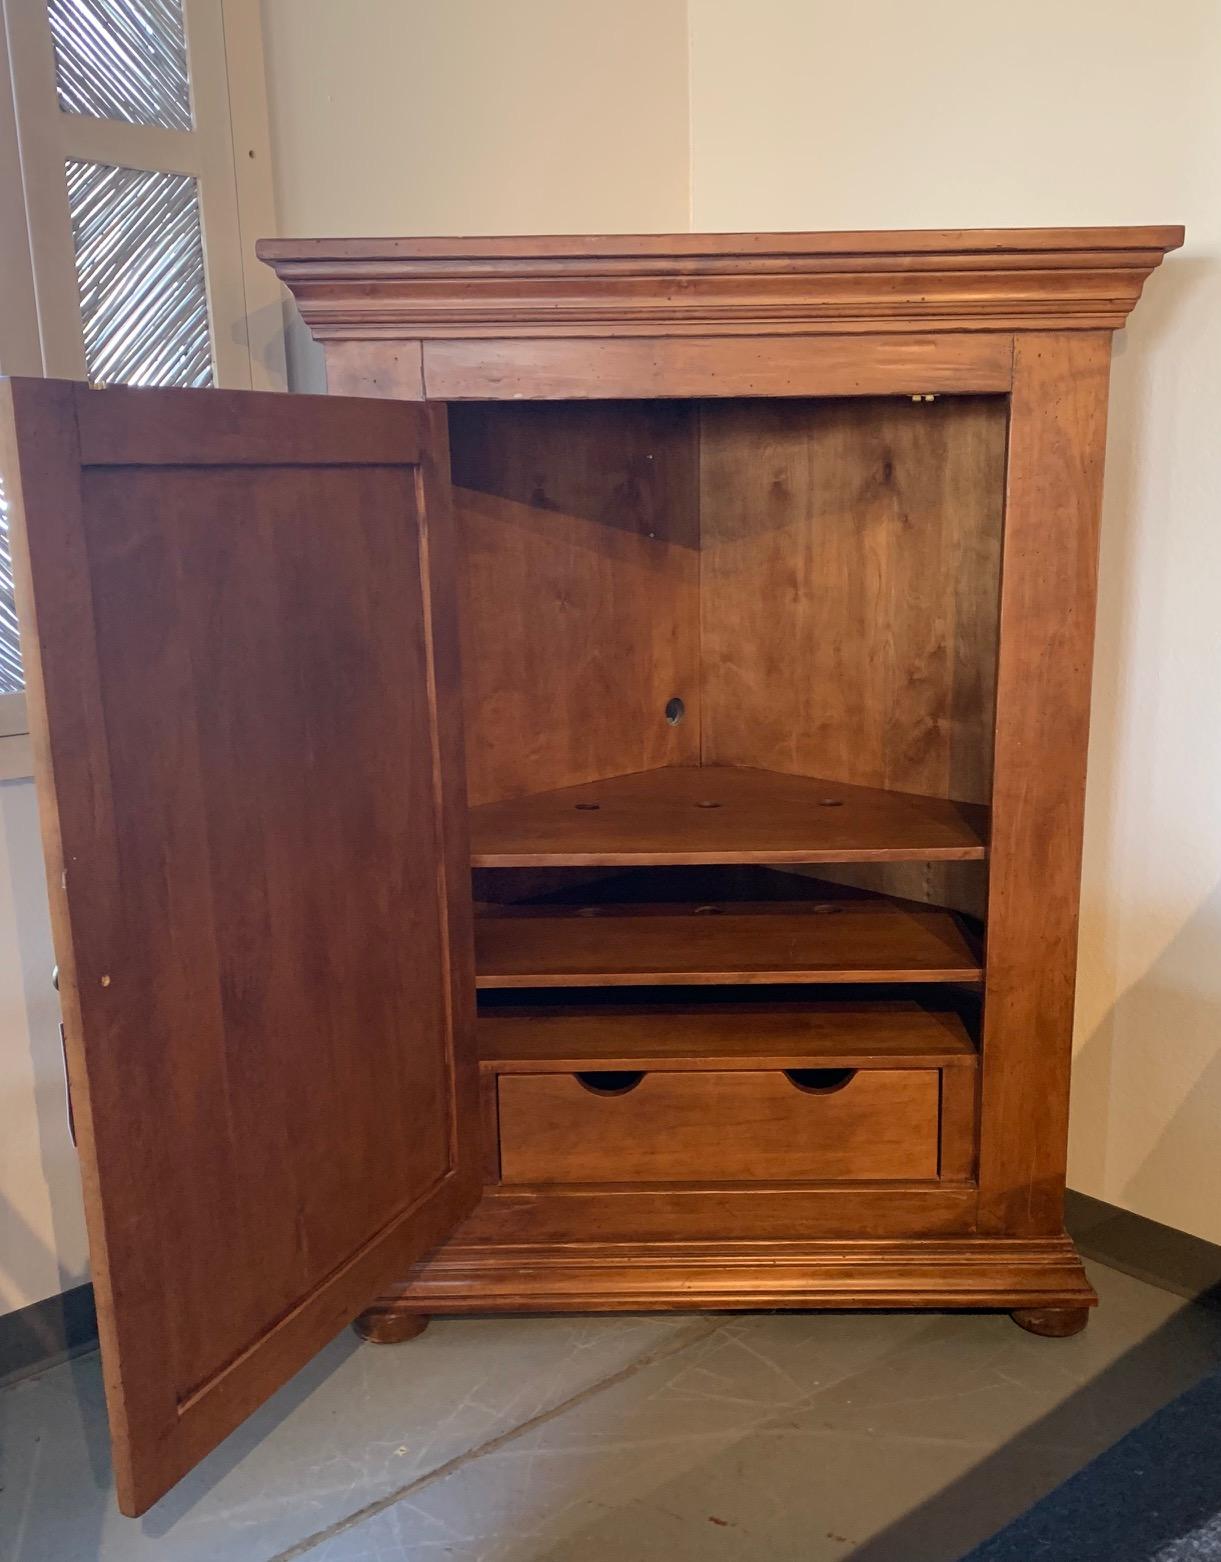 This Ernest Thompson Legacy Collection Custom Corner Cabinet is made in Knotty Alder with a custom finish. Beautifully handcrafted and distressed. There are three shelves and one drawer in the interior.